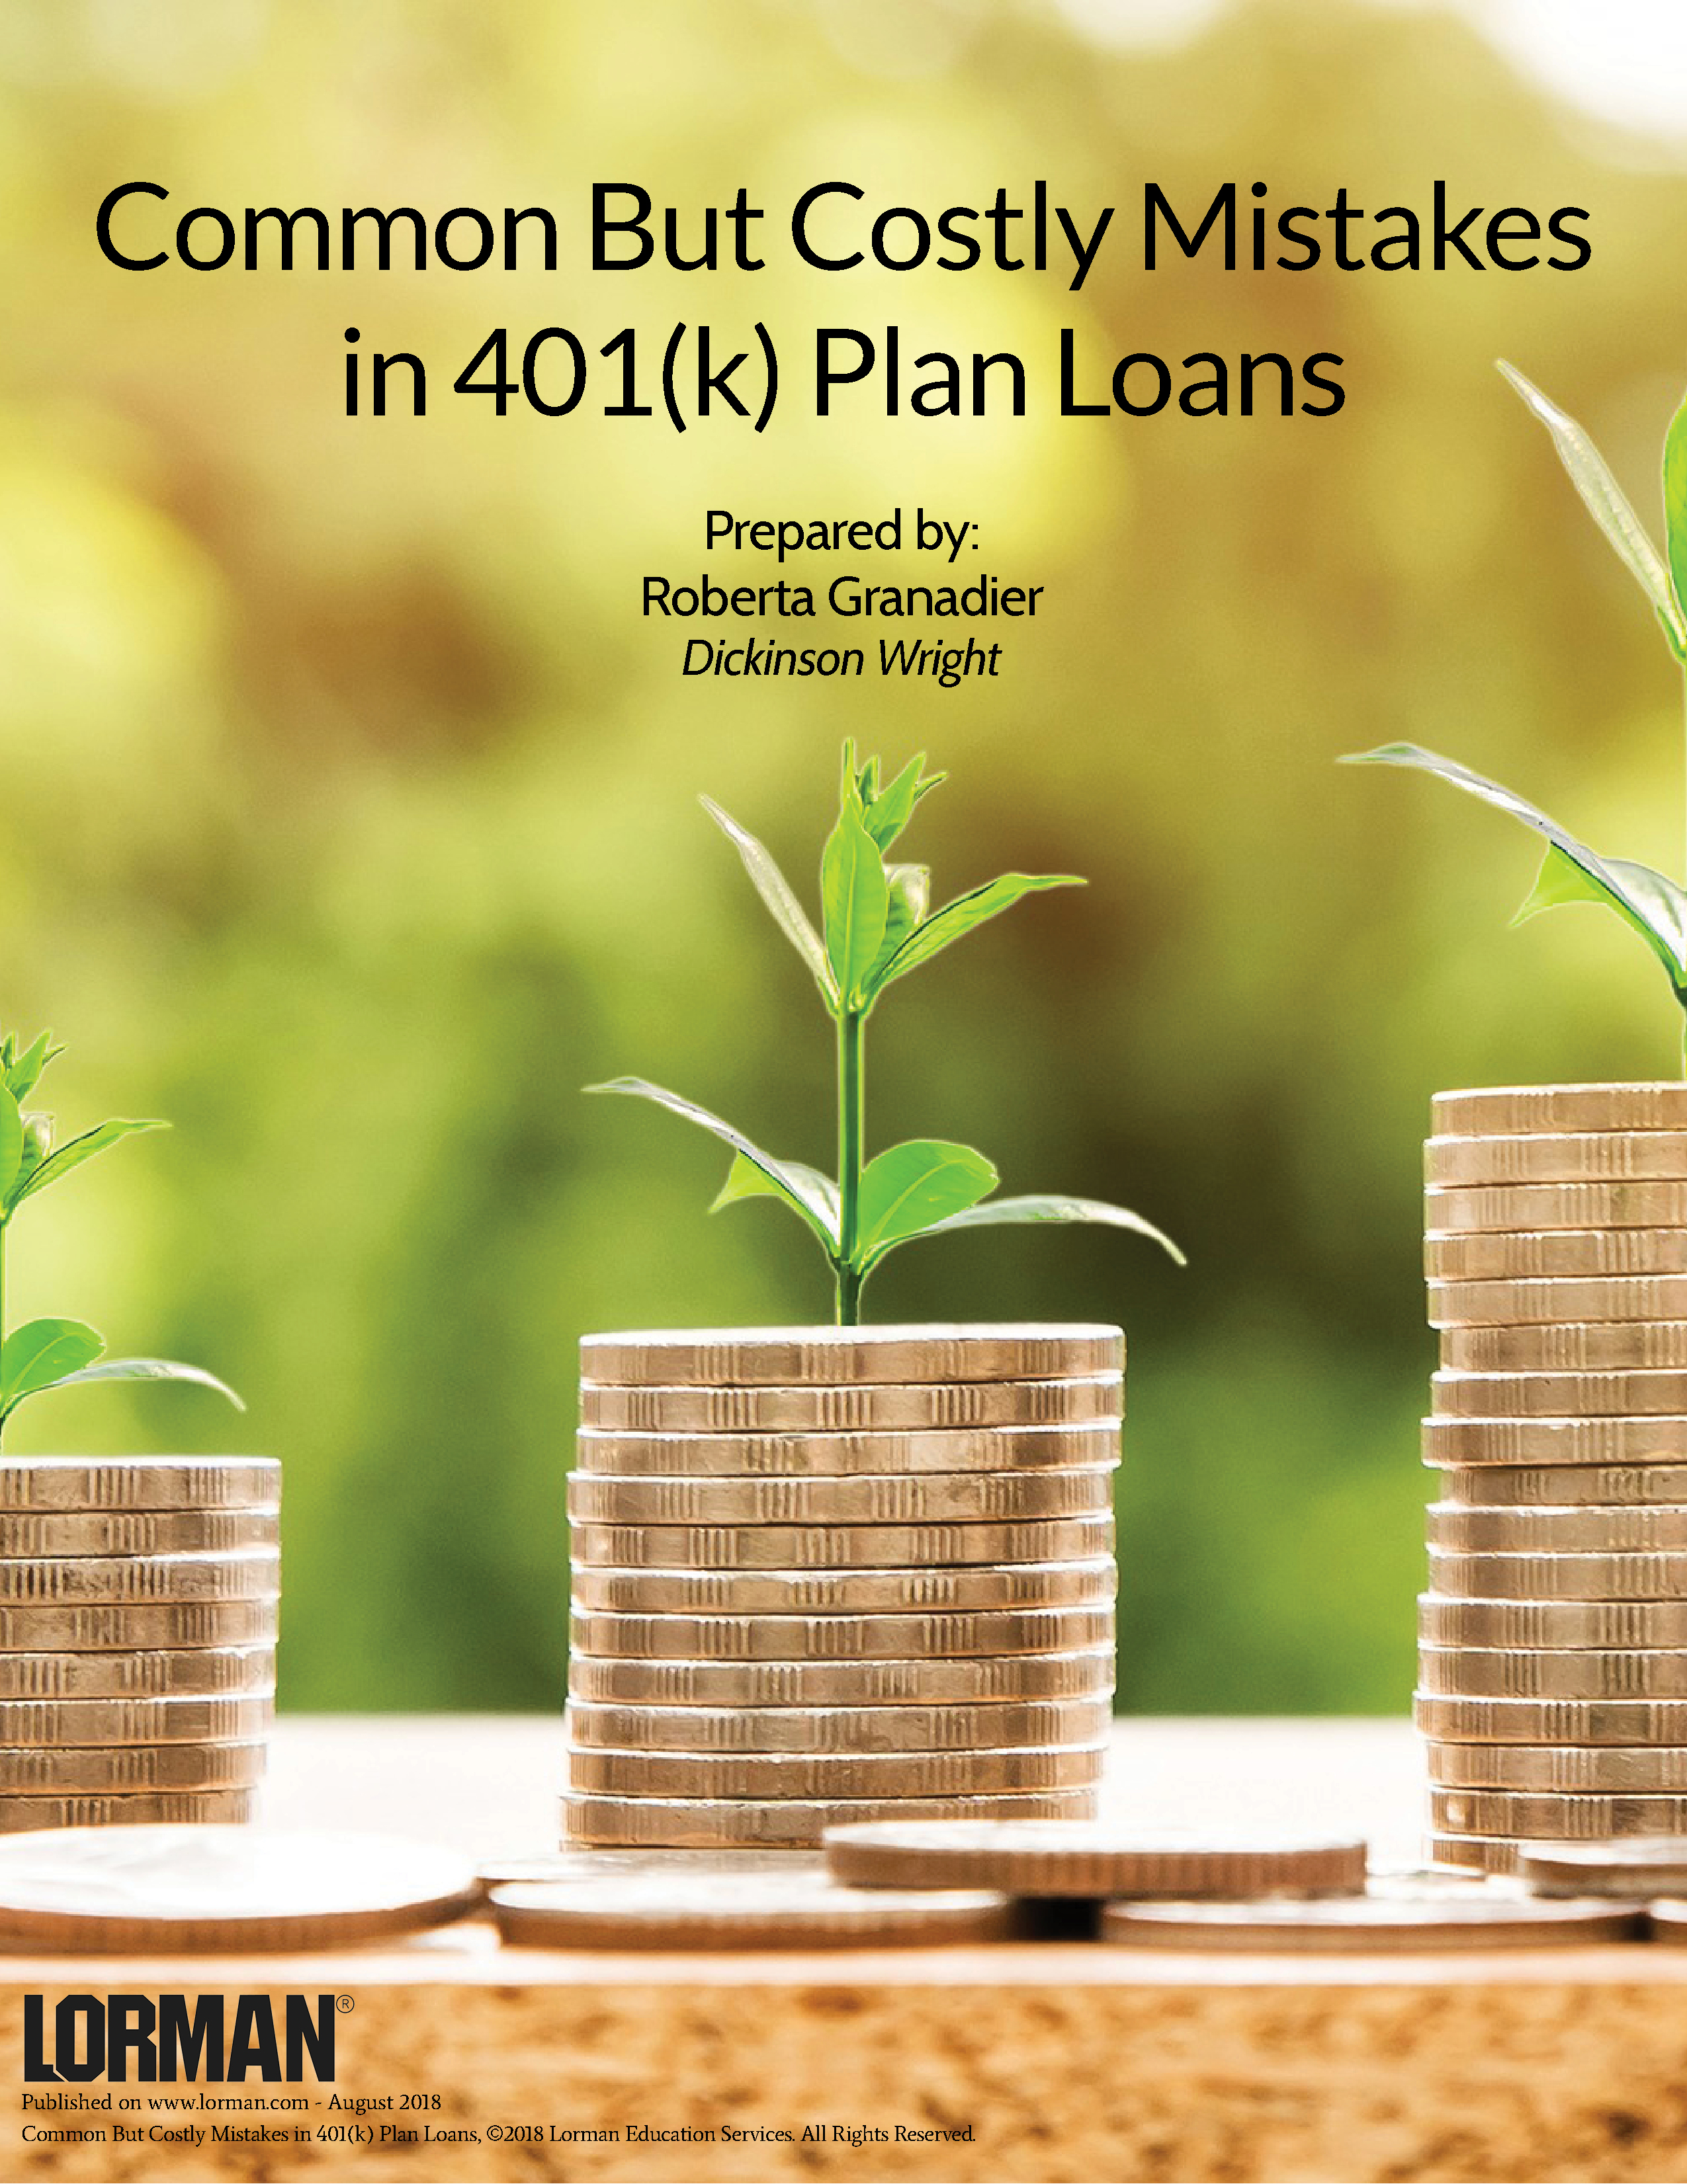 Common but Costly Mistakes in 401(k) Plan Loans